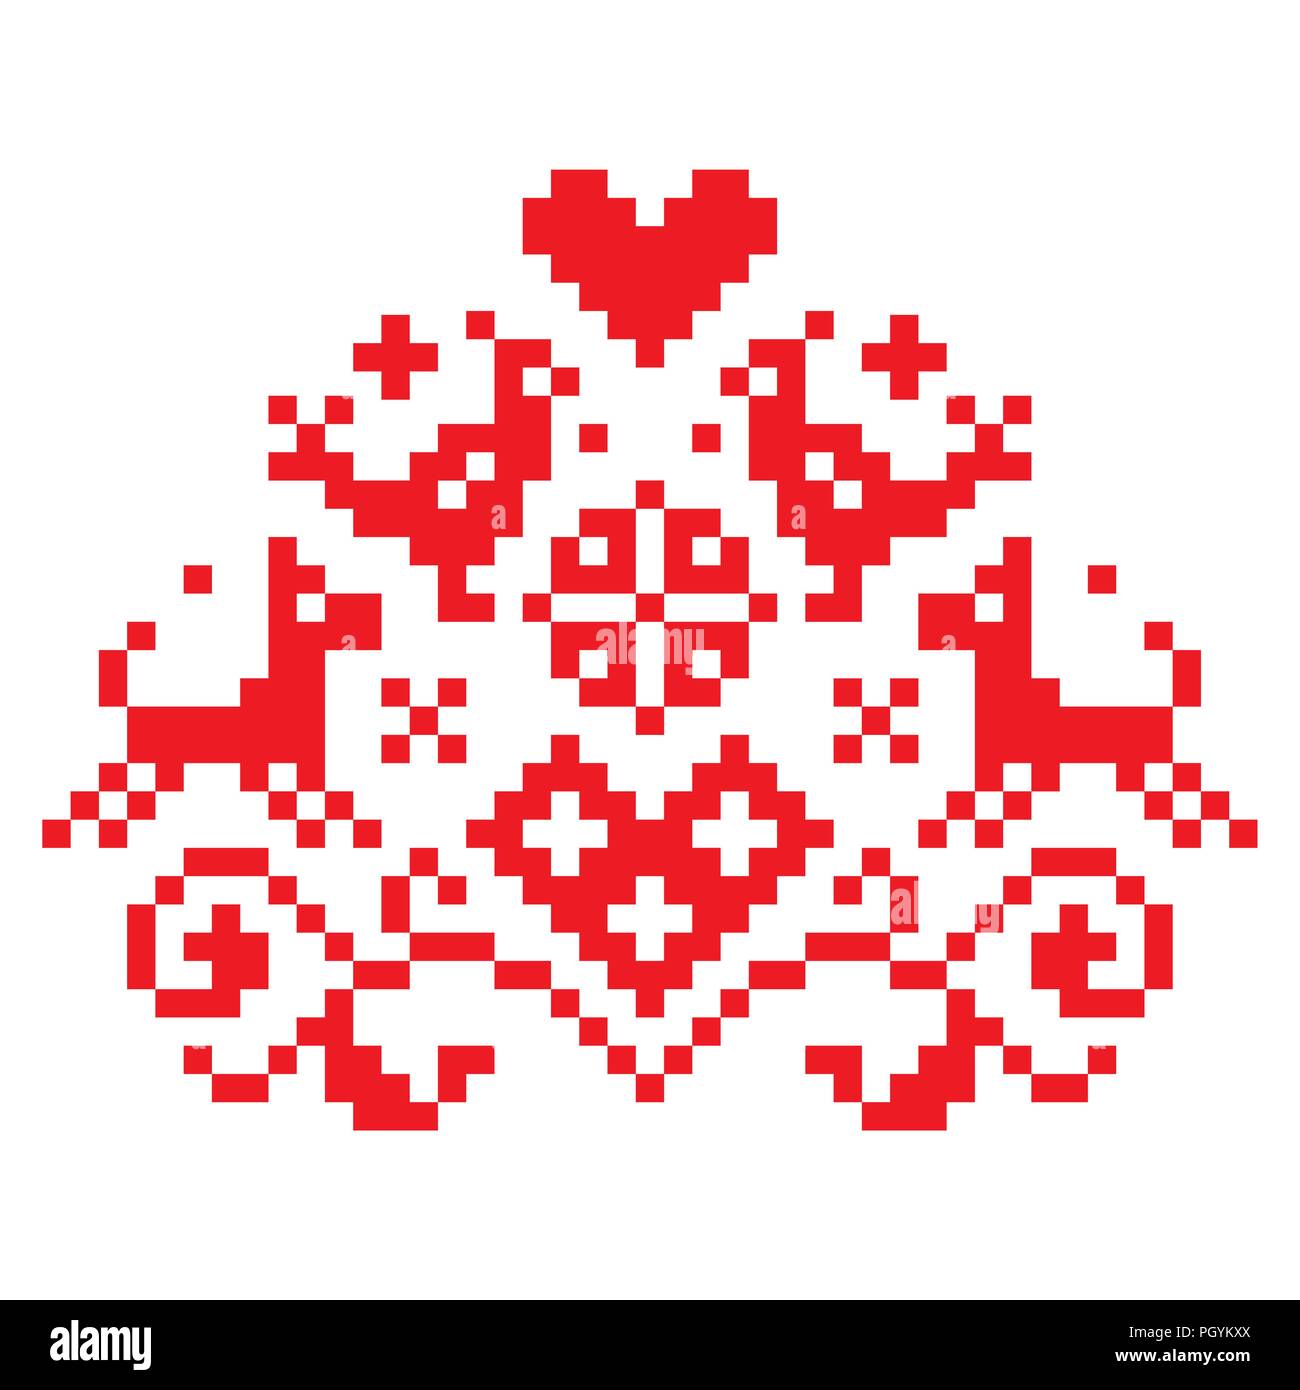 Cross stitch vector seamless folk art single pattern with flowers and animals - retro background inspired German old style retro embroidery Stock Vector